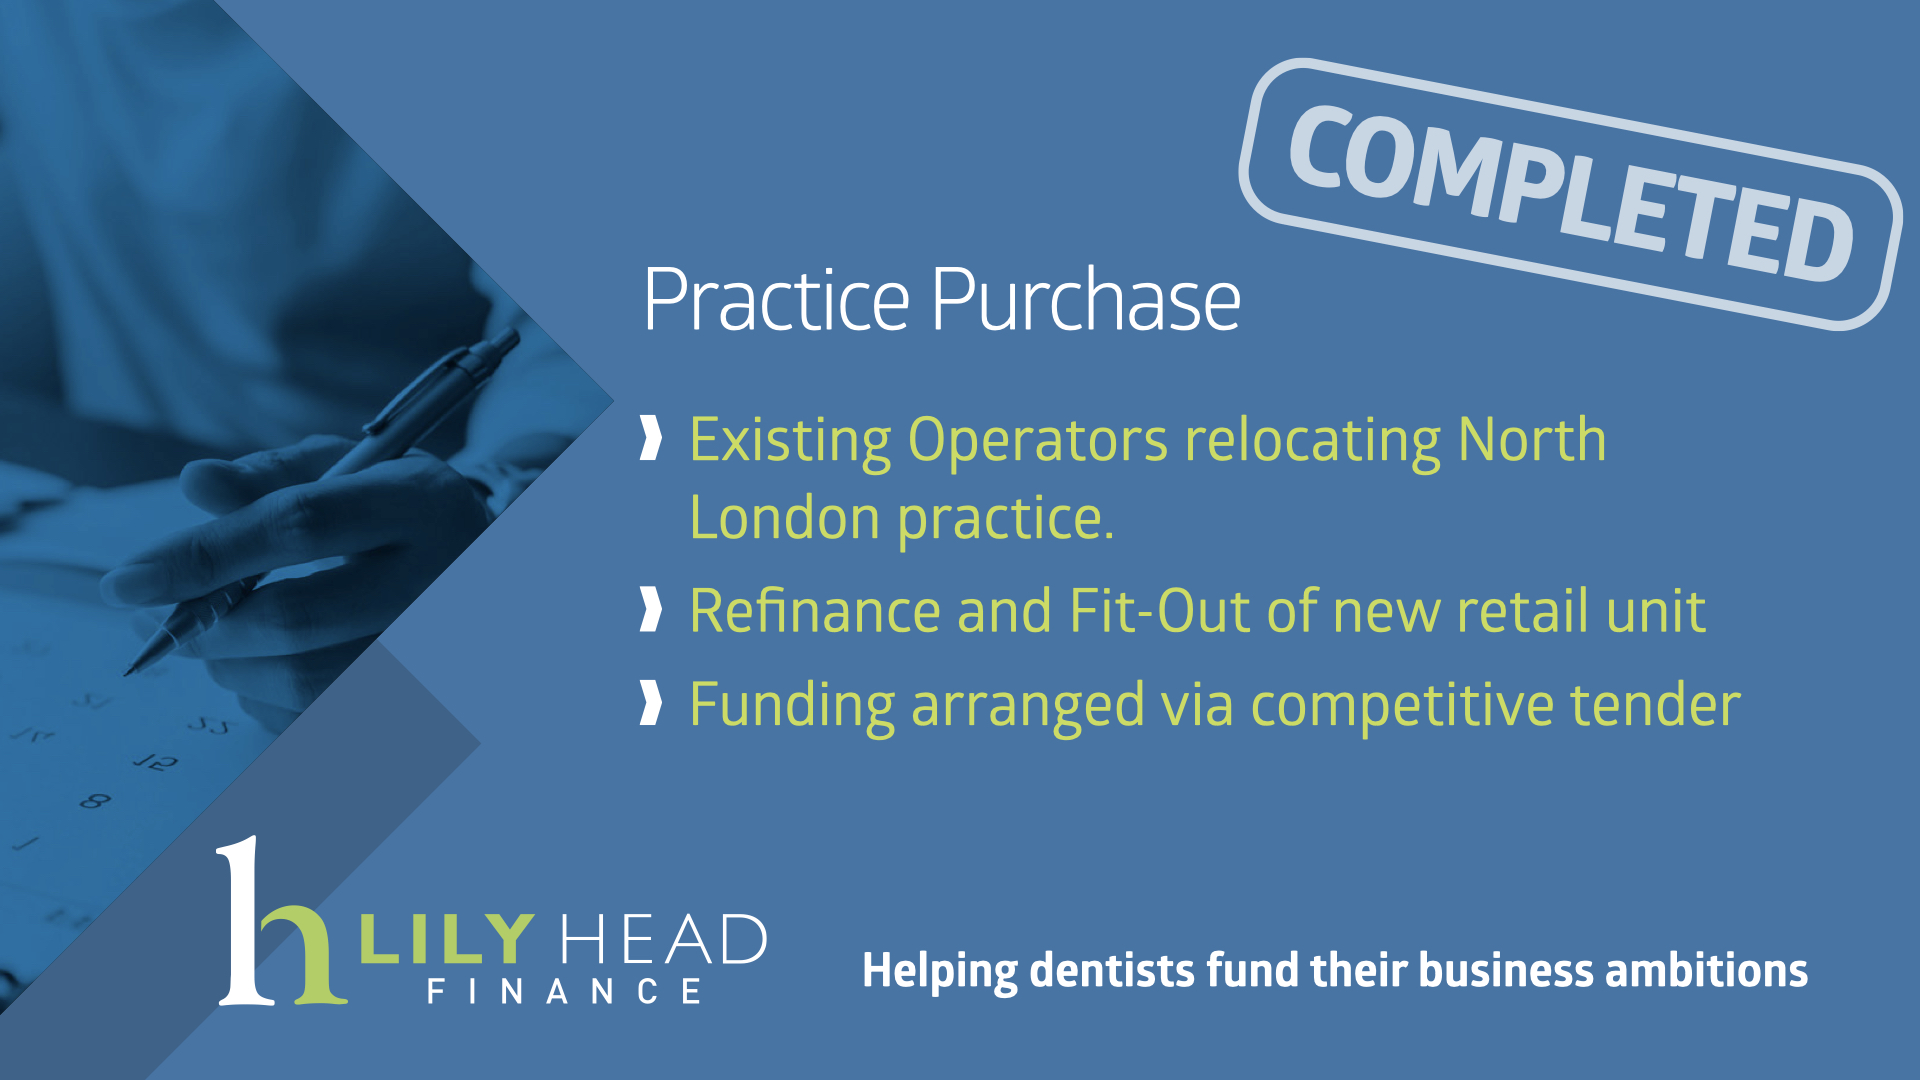 Completion of Deal to Relocate North London Dental Practice - Lily Head Finance